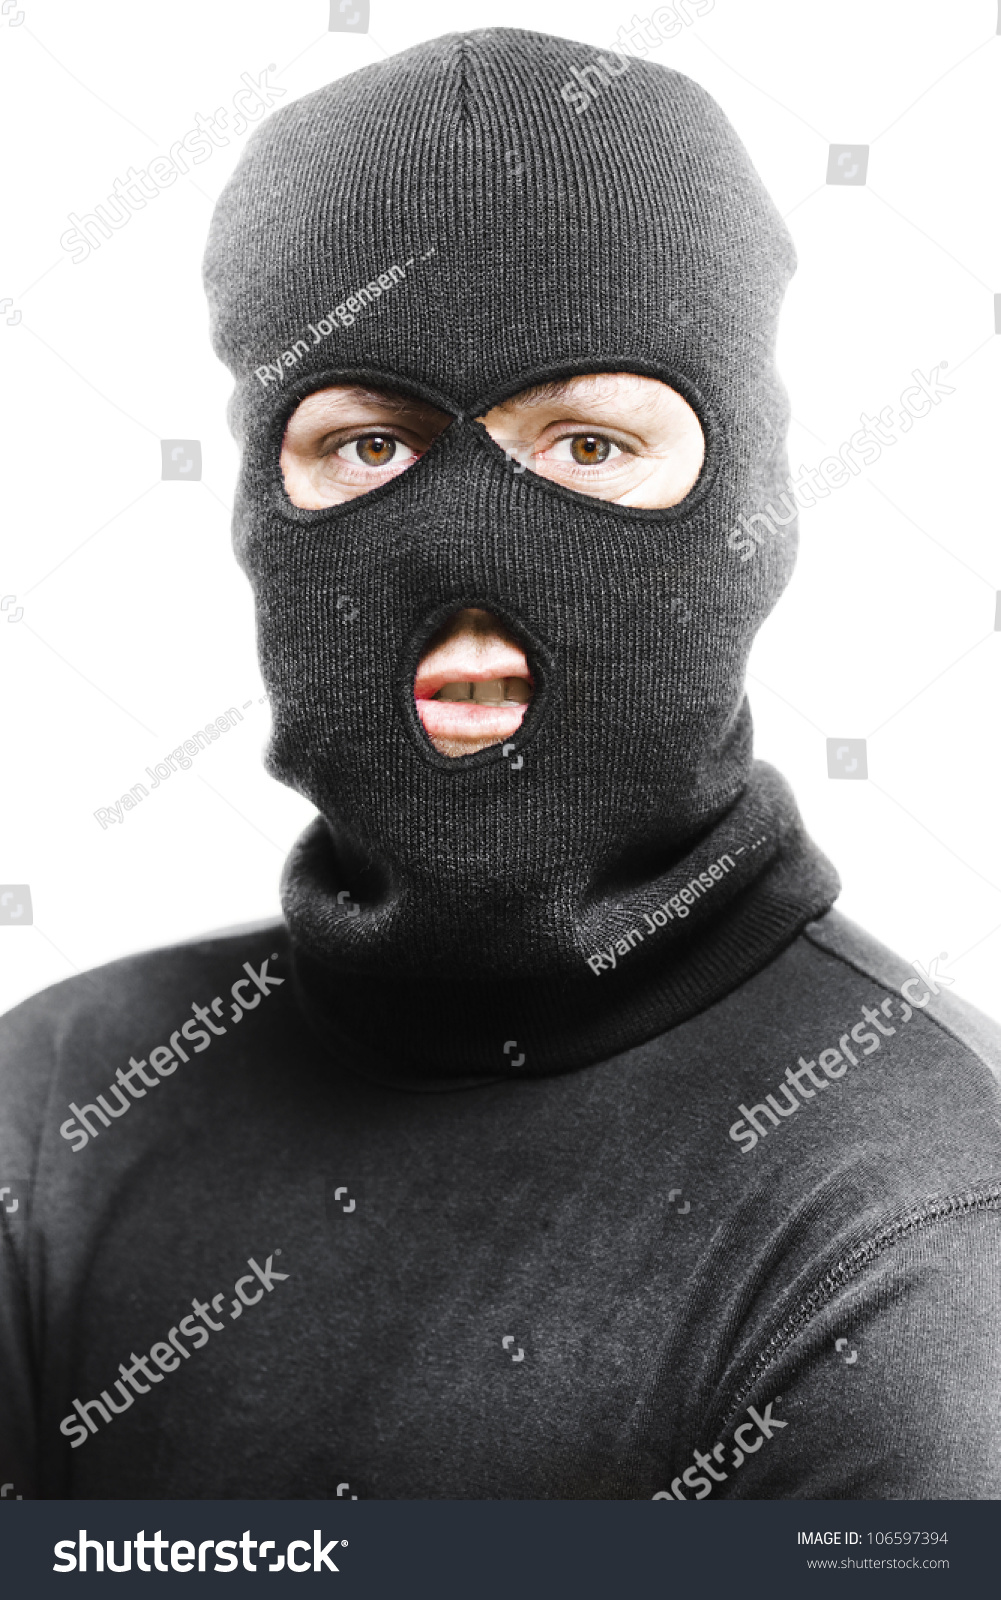 Face Of A Angry Burglar Wearing A